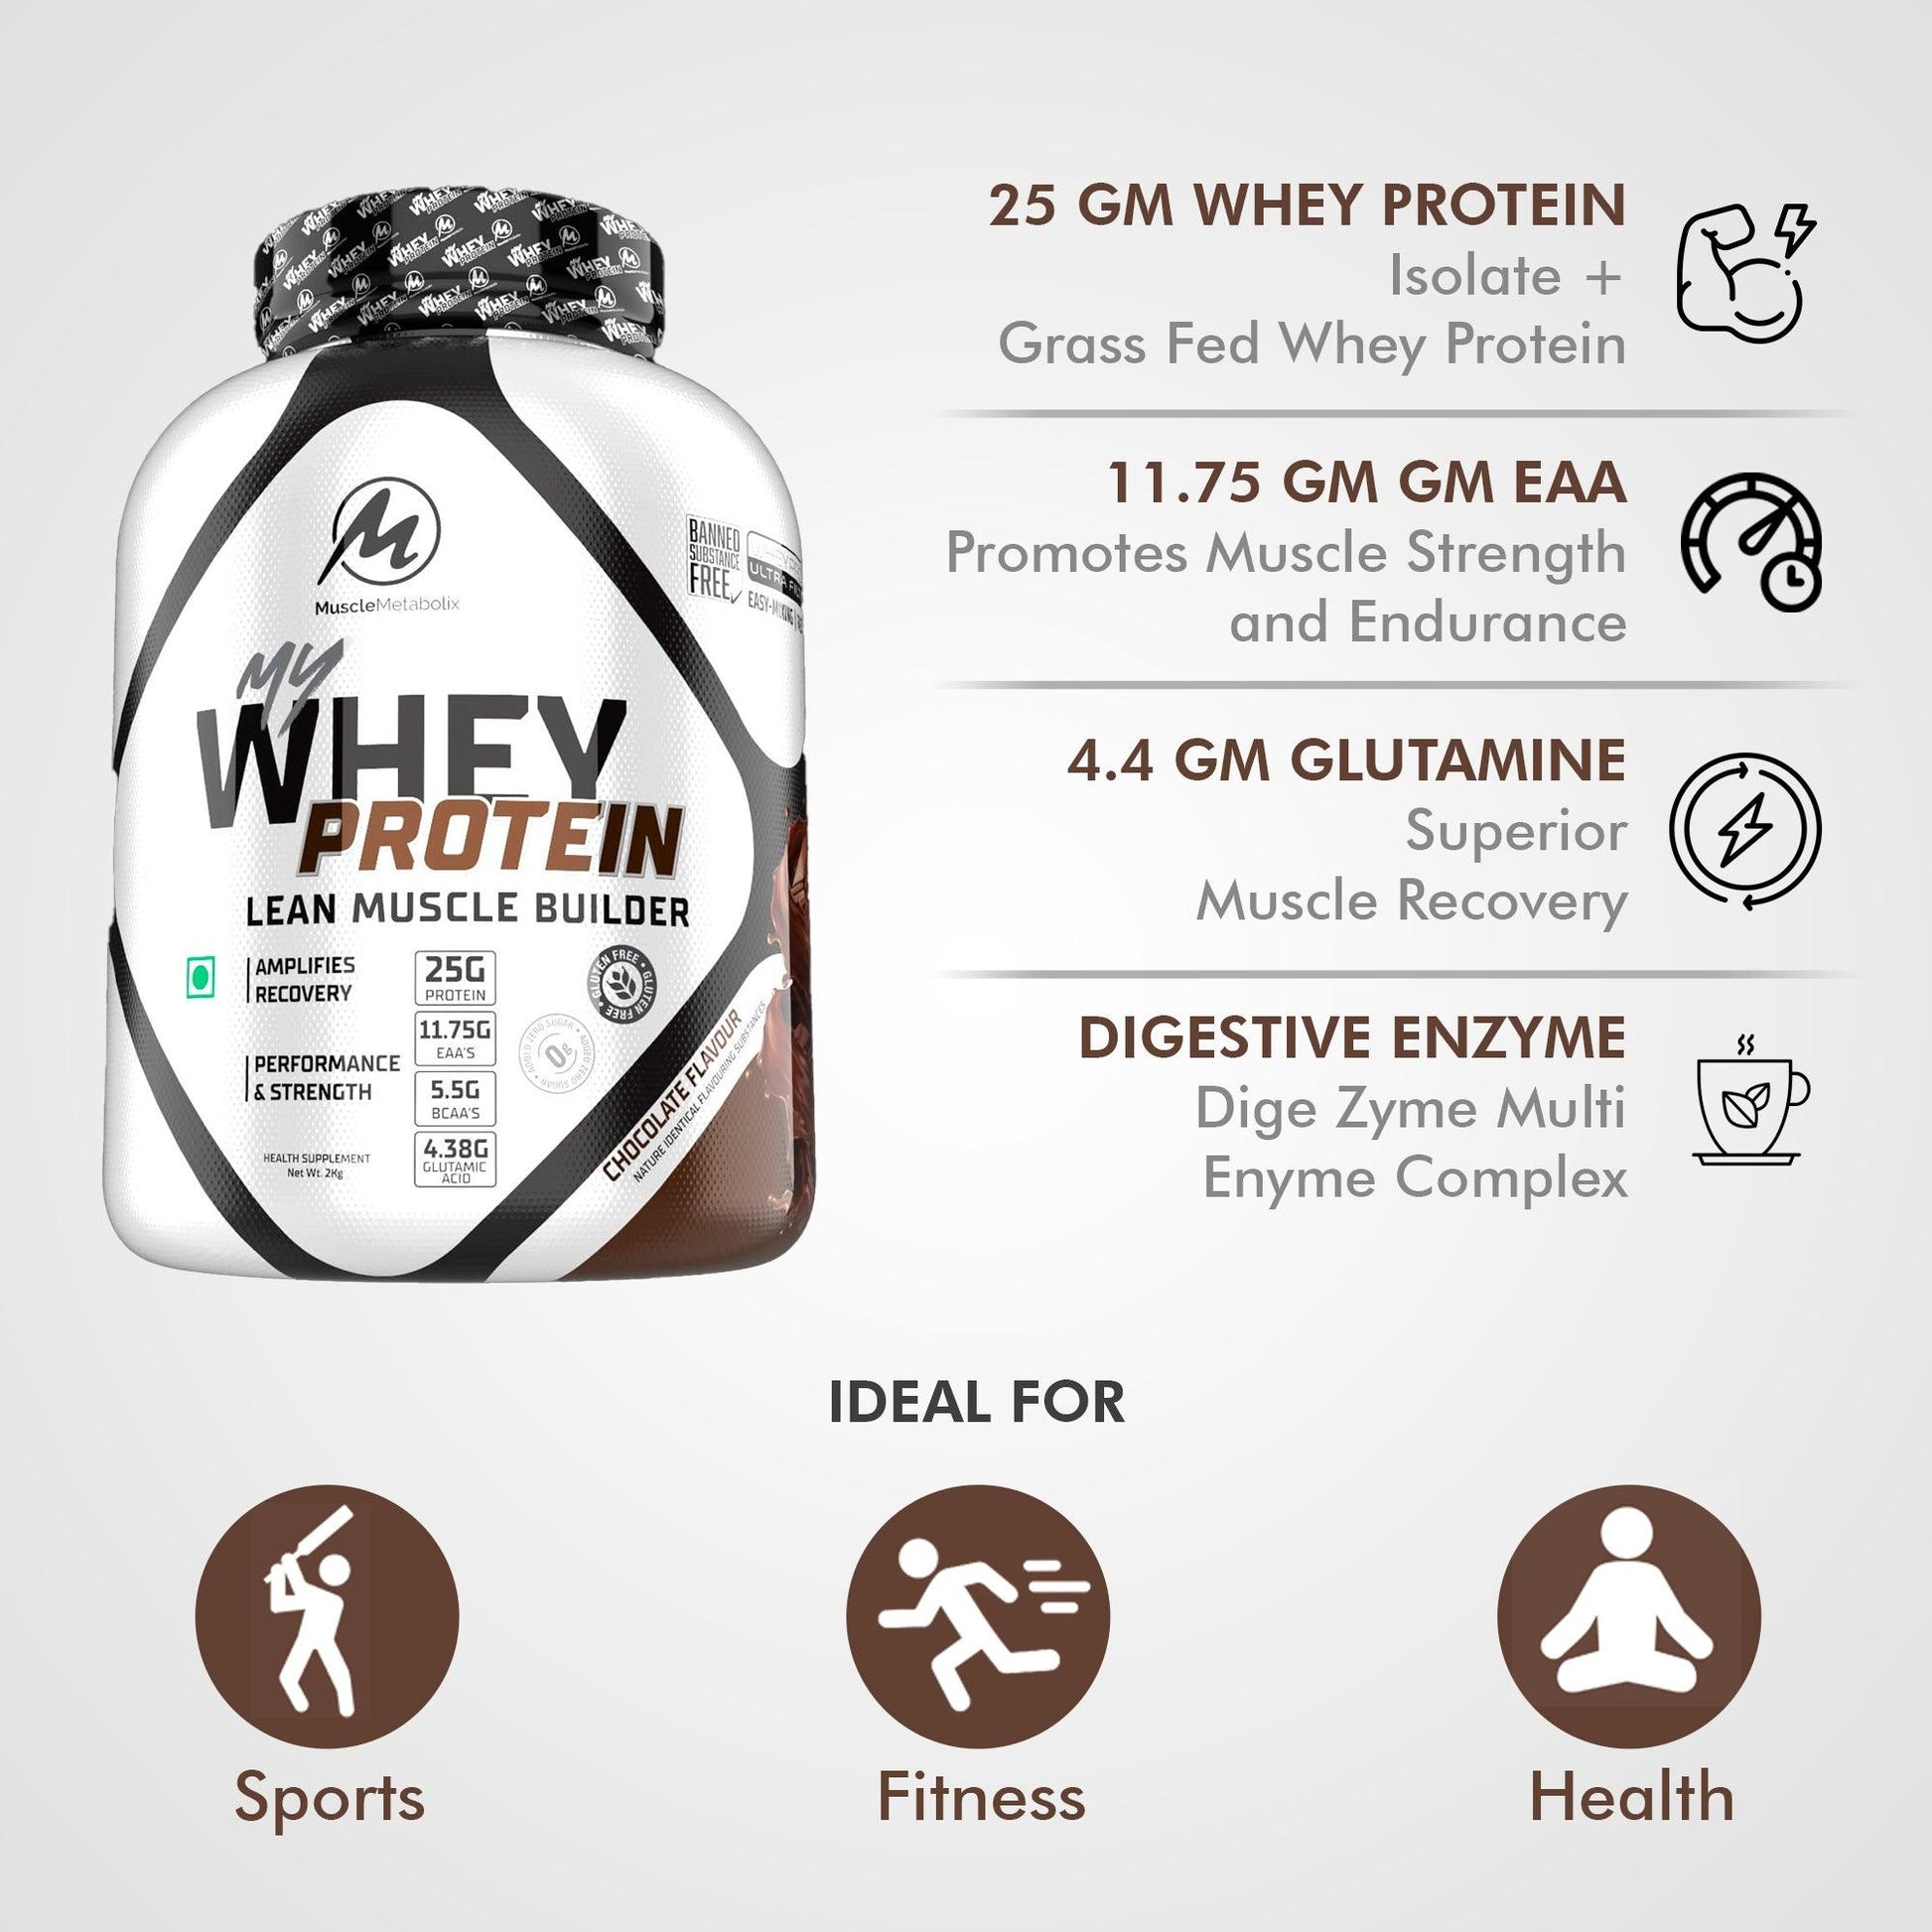 Muscle Metabolix My Whey Protein 2kg (CHOCOLATE) Lean Muscle Builder - The Muscle Kart.com